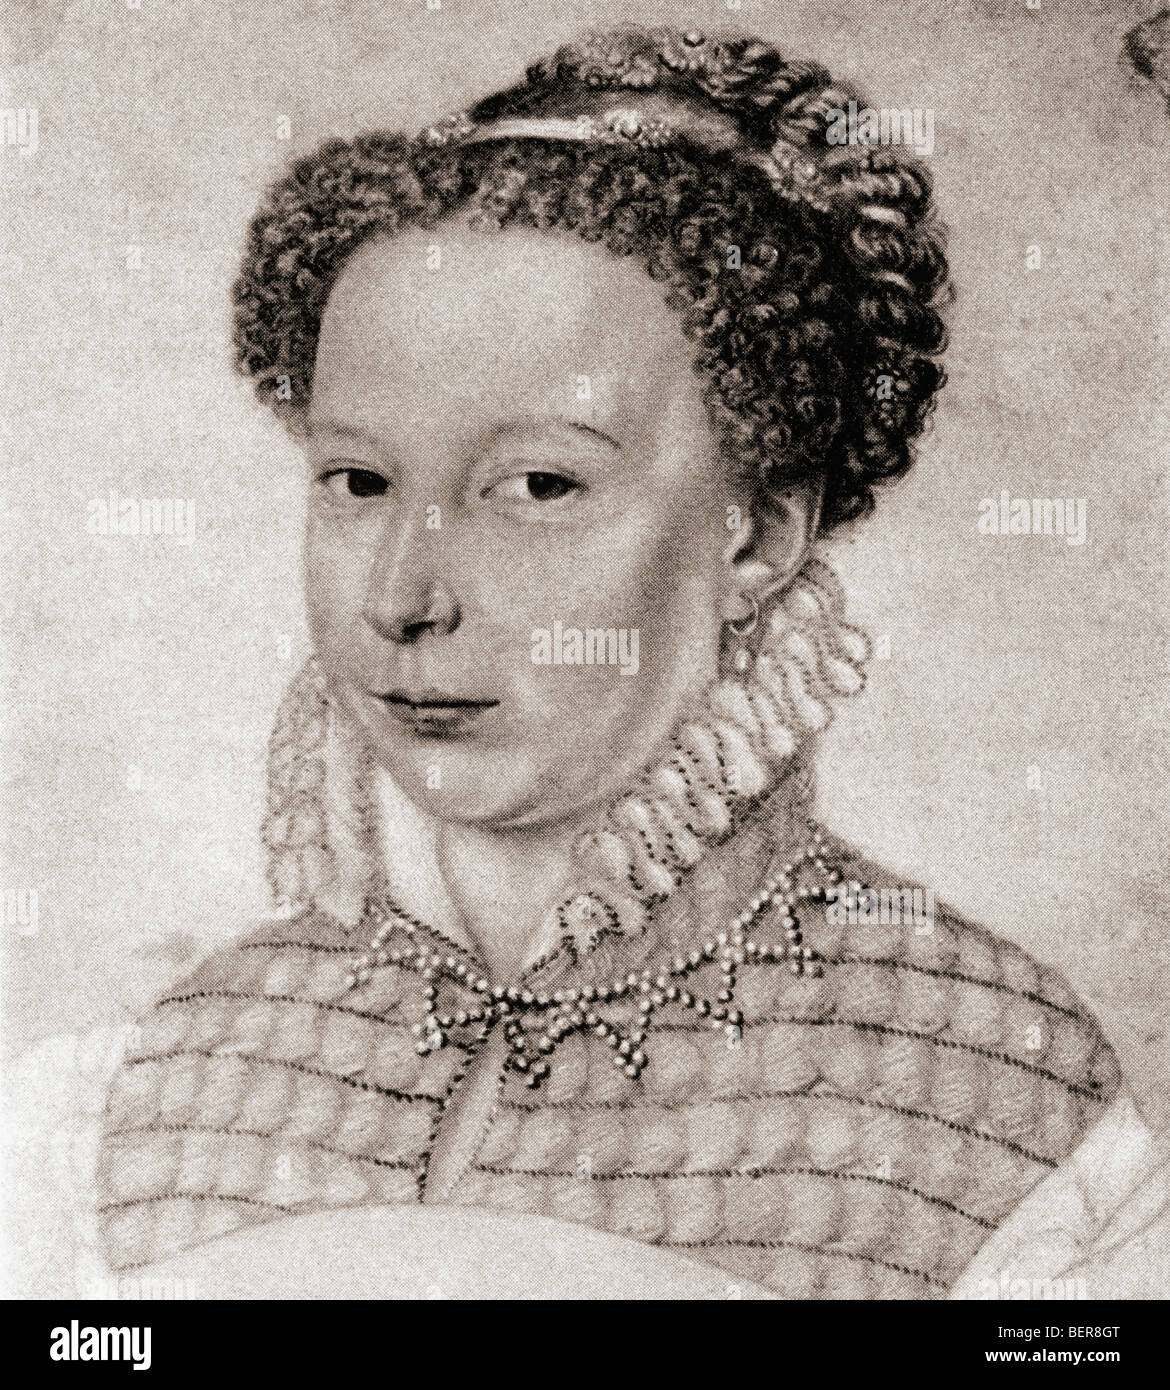 Marguerite de Valois, aka La Reine Margot and Queen Margot, 1553 -1615. French princess of the Valois dynasty and queen consort of Navarre and France. Stock Photo